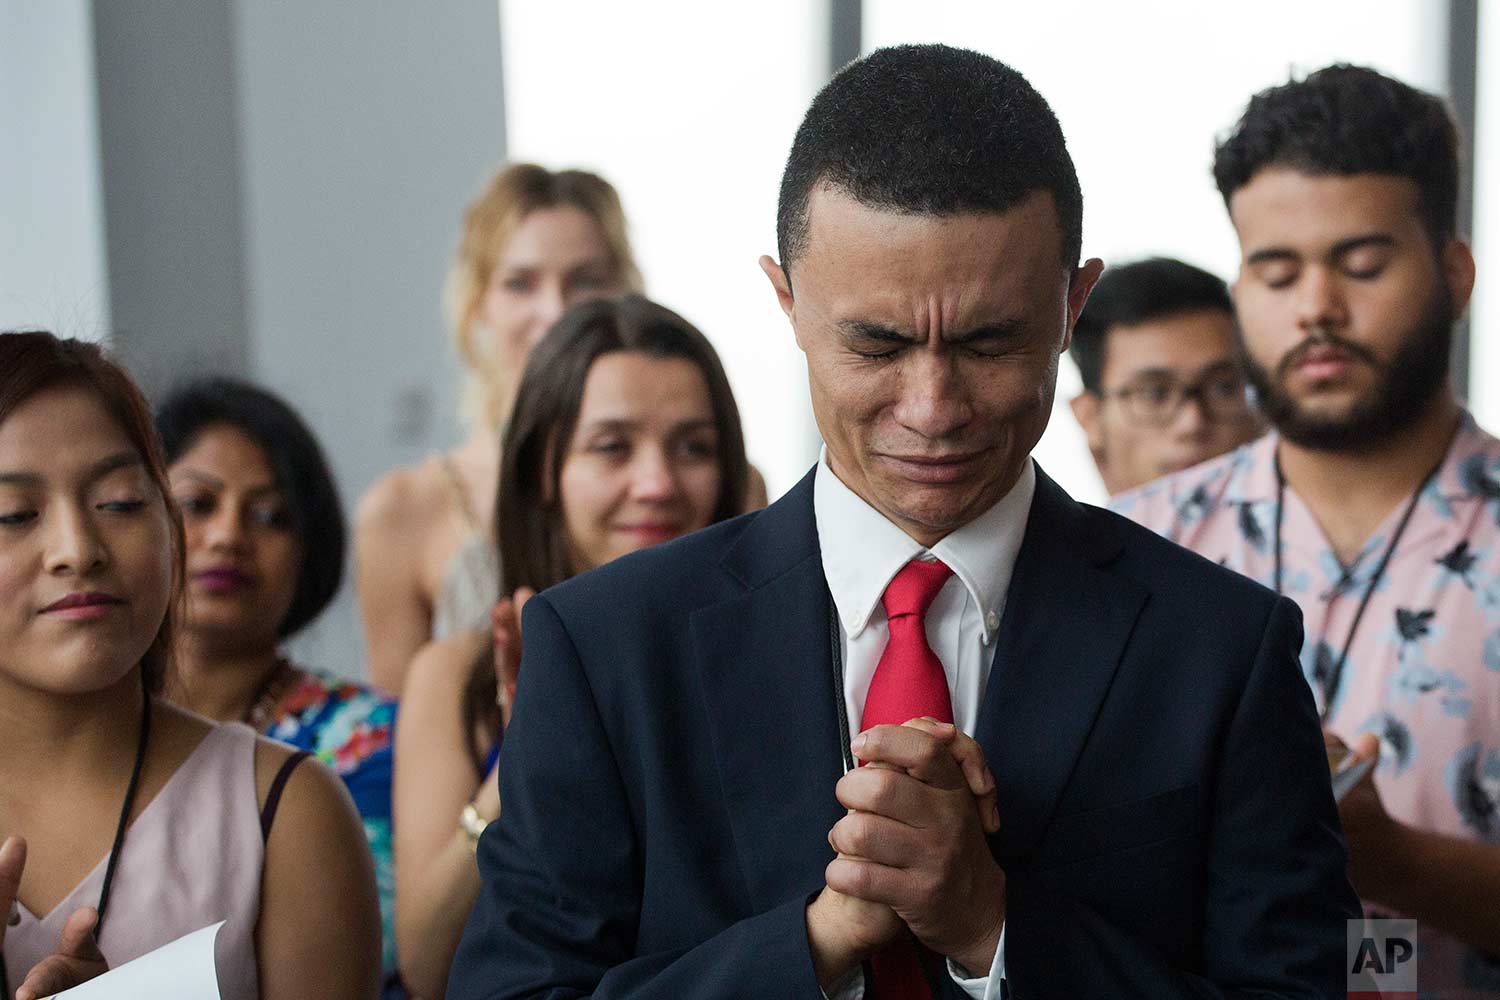  Gleidson Hoffman, originally from Brazil, becomes emotional during his naturalization ceremony, Tuesday, Aug. 15, 2017, in New York. (AP Photo/Mark Lennihan) 